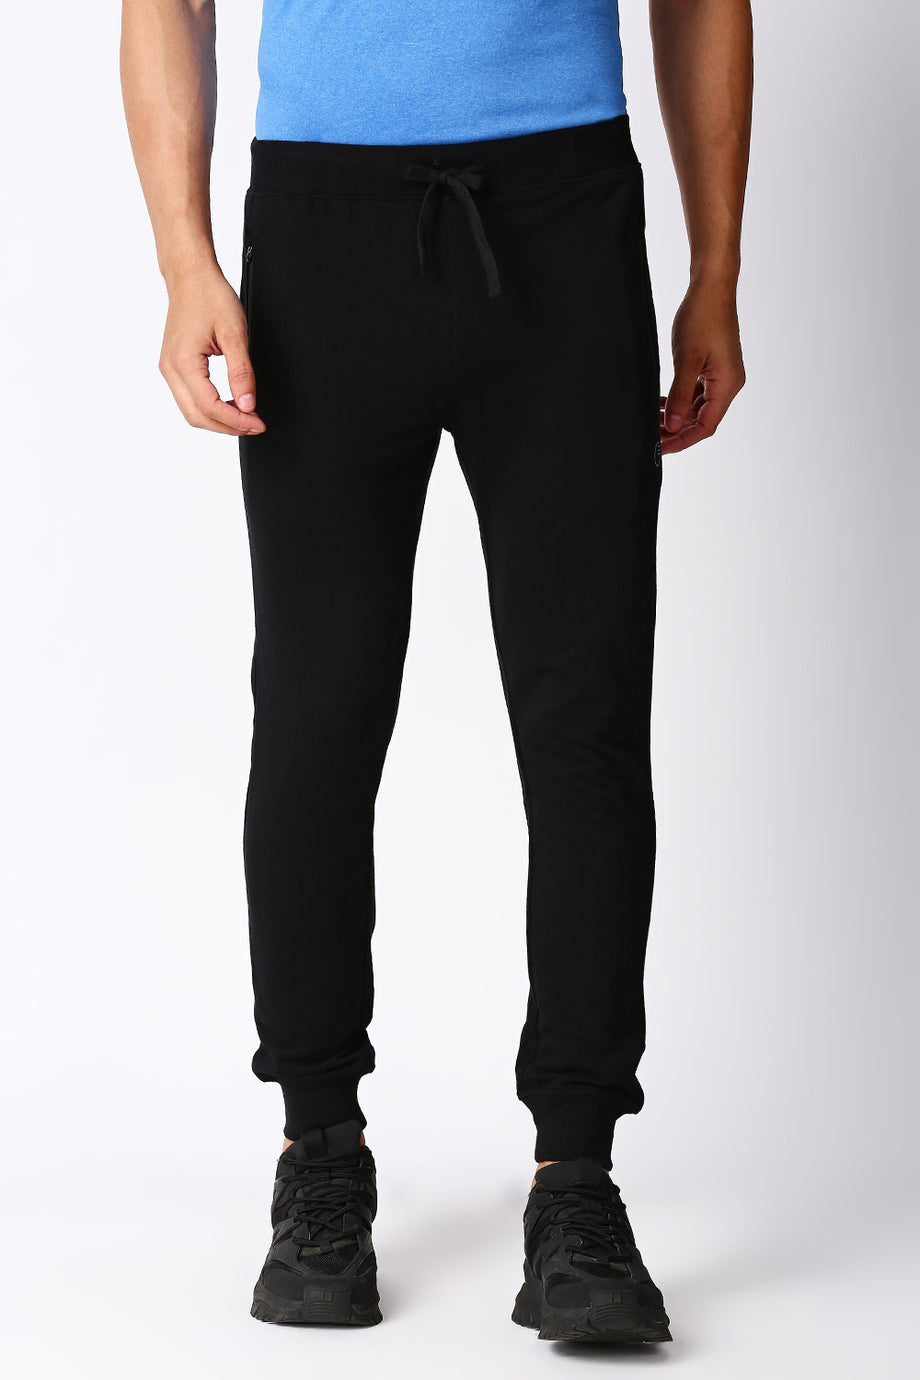 Buy Jogger Pants with Zipper Pockets Online at Best Prices in India   JioMart